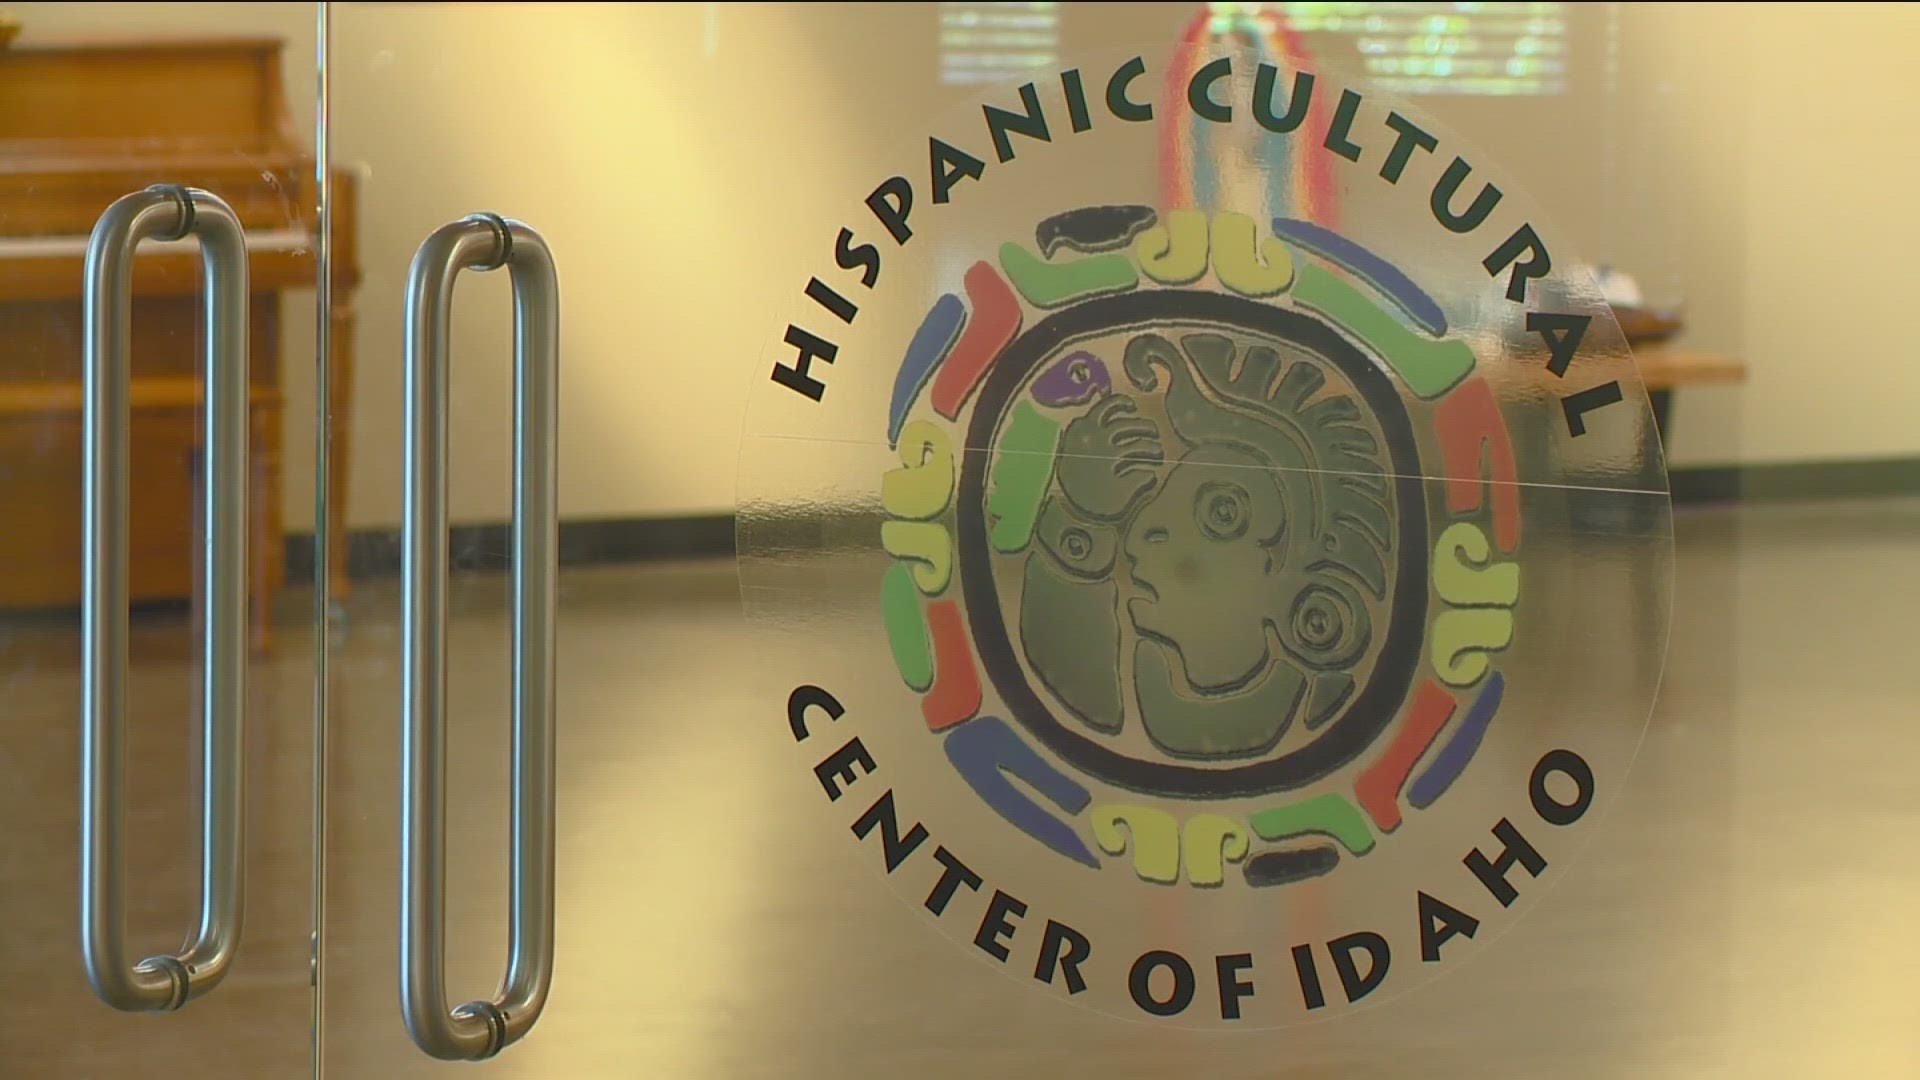 The city of Nampa is requesting applicants for an advisory committee to chart a path forward for the Hispanic Cultural Center of Idaho.